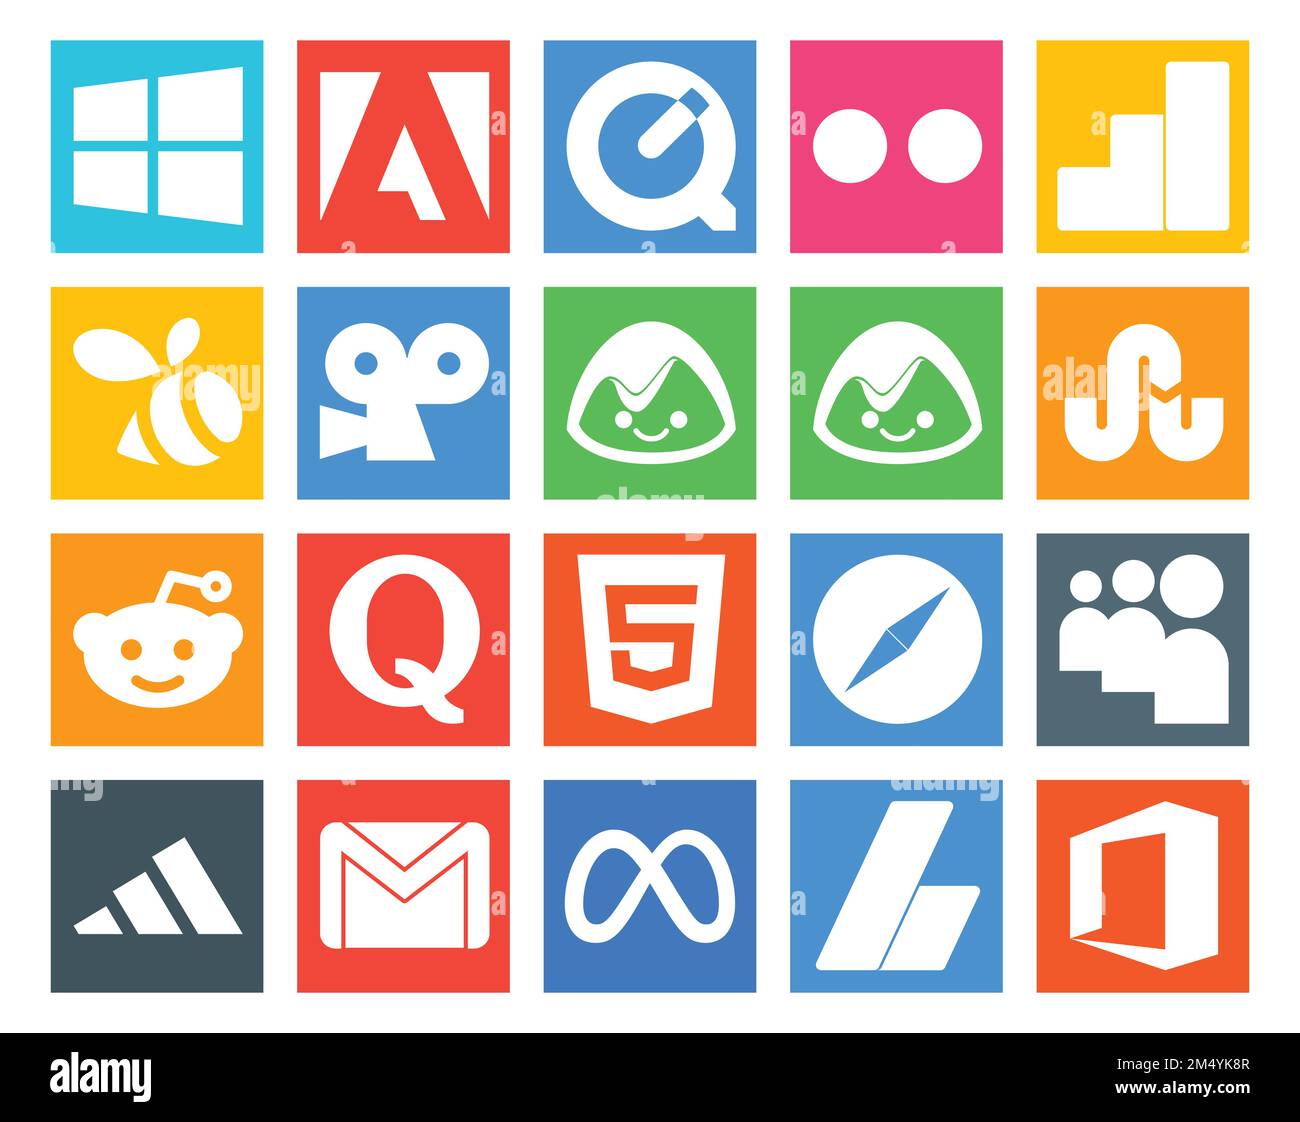 20 Social Media Icon Pack Including gmail. myspace. stumbleupon. browser. html Stock Vector